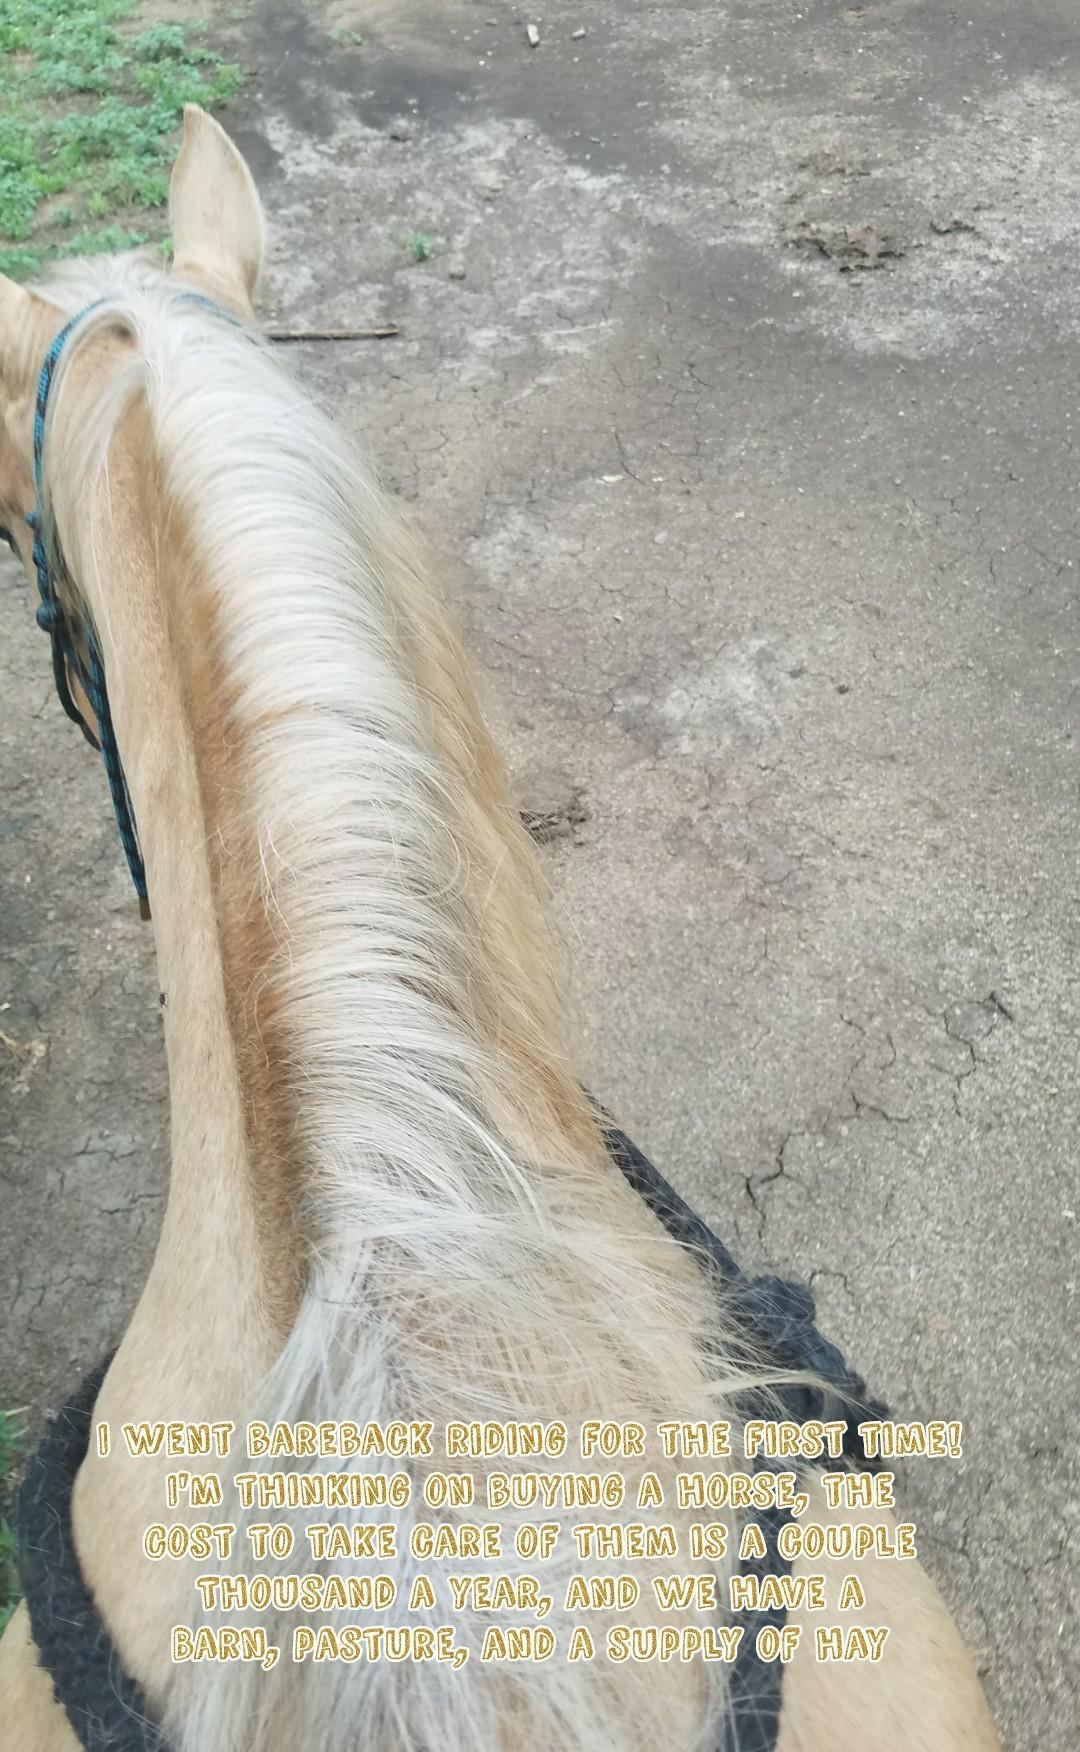 I went bareback riding for the first time!
I'm thinking on buying a horse, the
Cost to take care of them is a couple
Thousand a year, and we have a
Barn, pasture, and a supply of hay